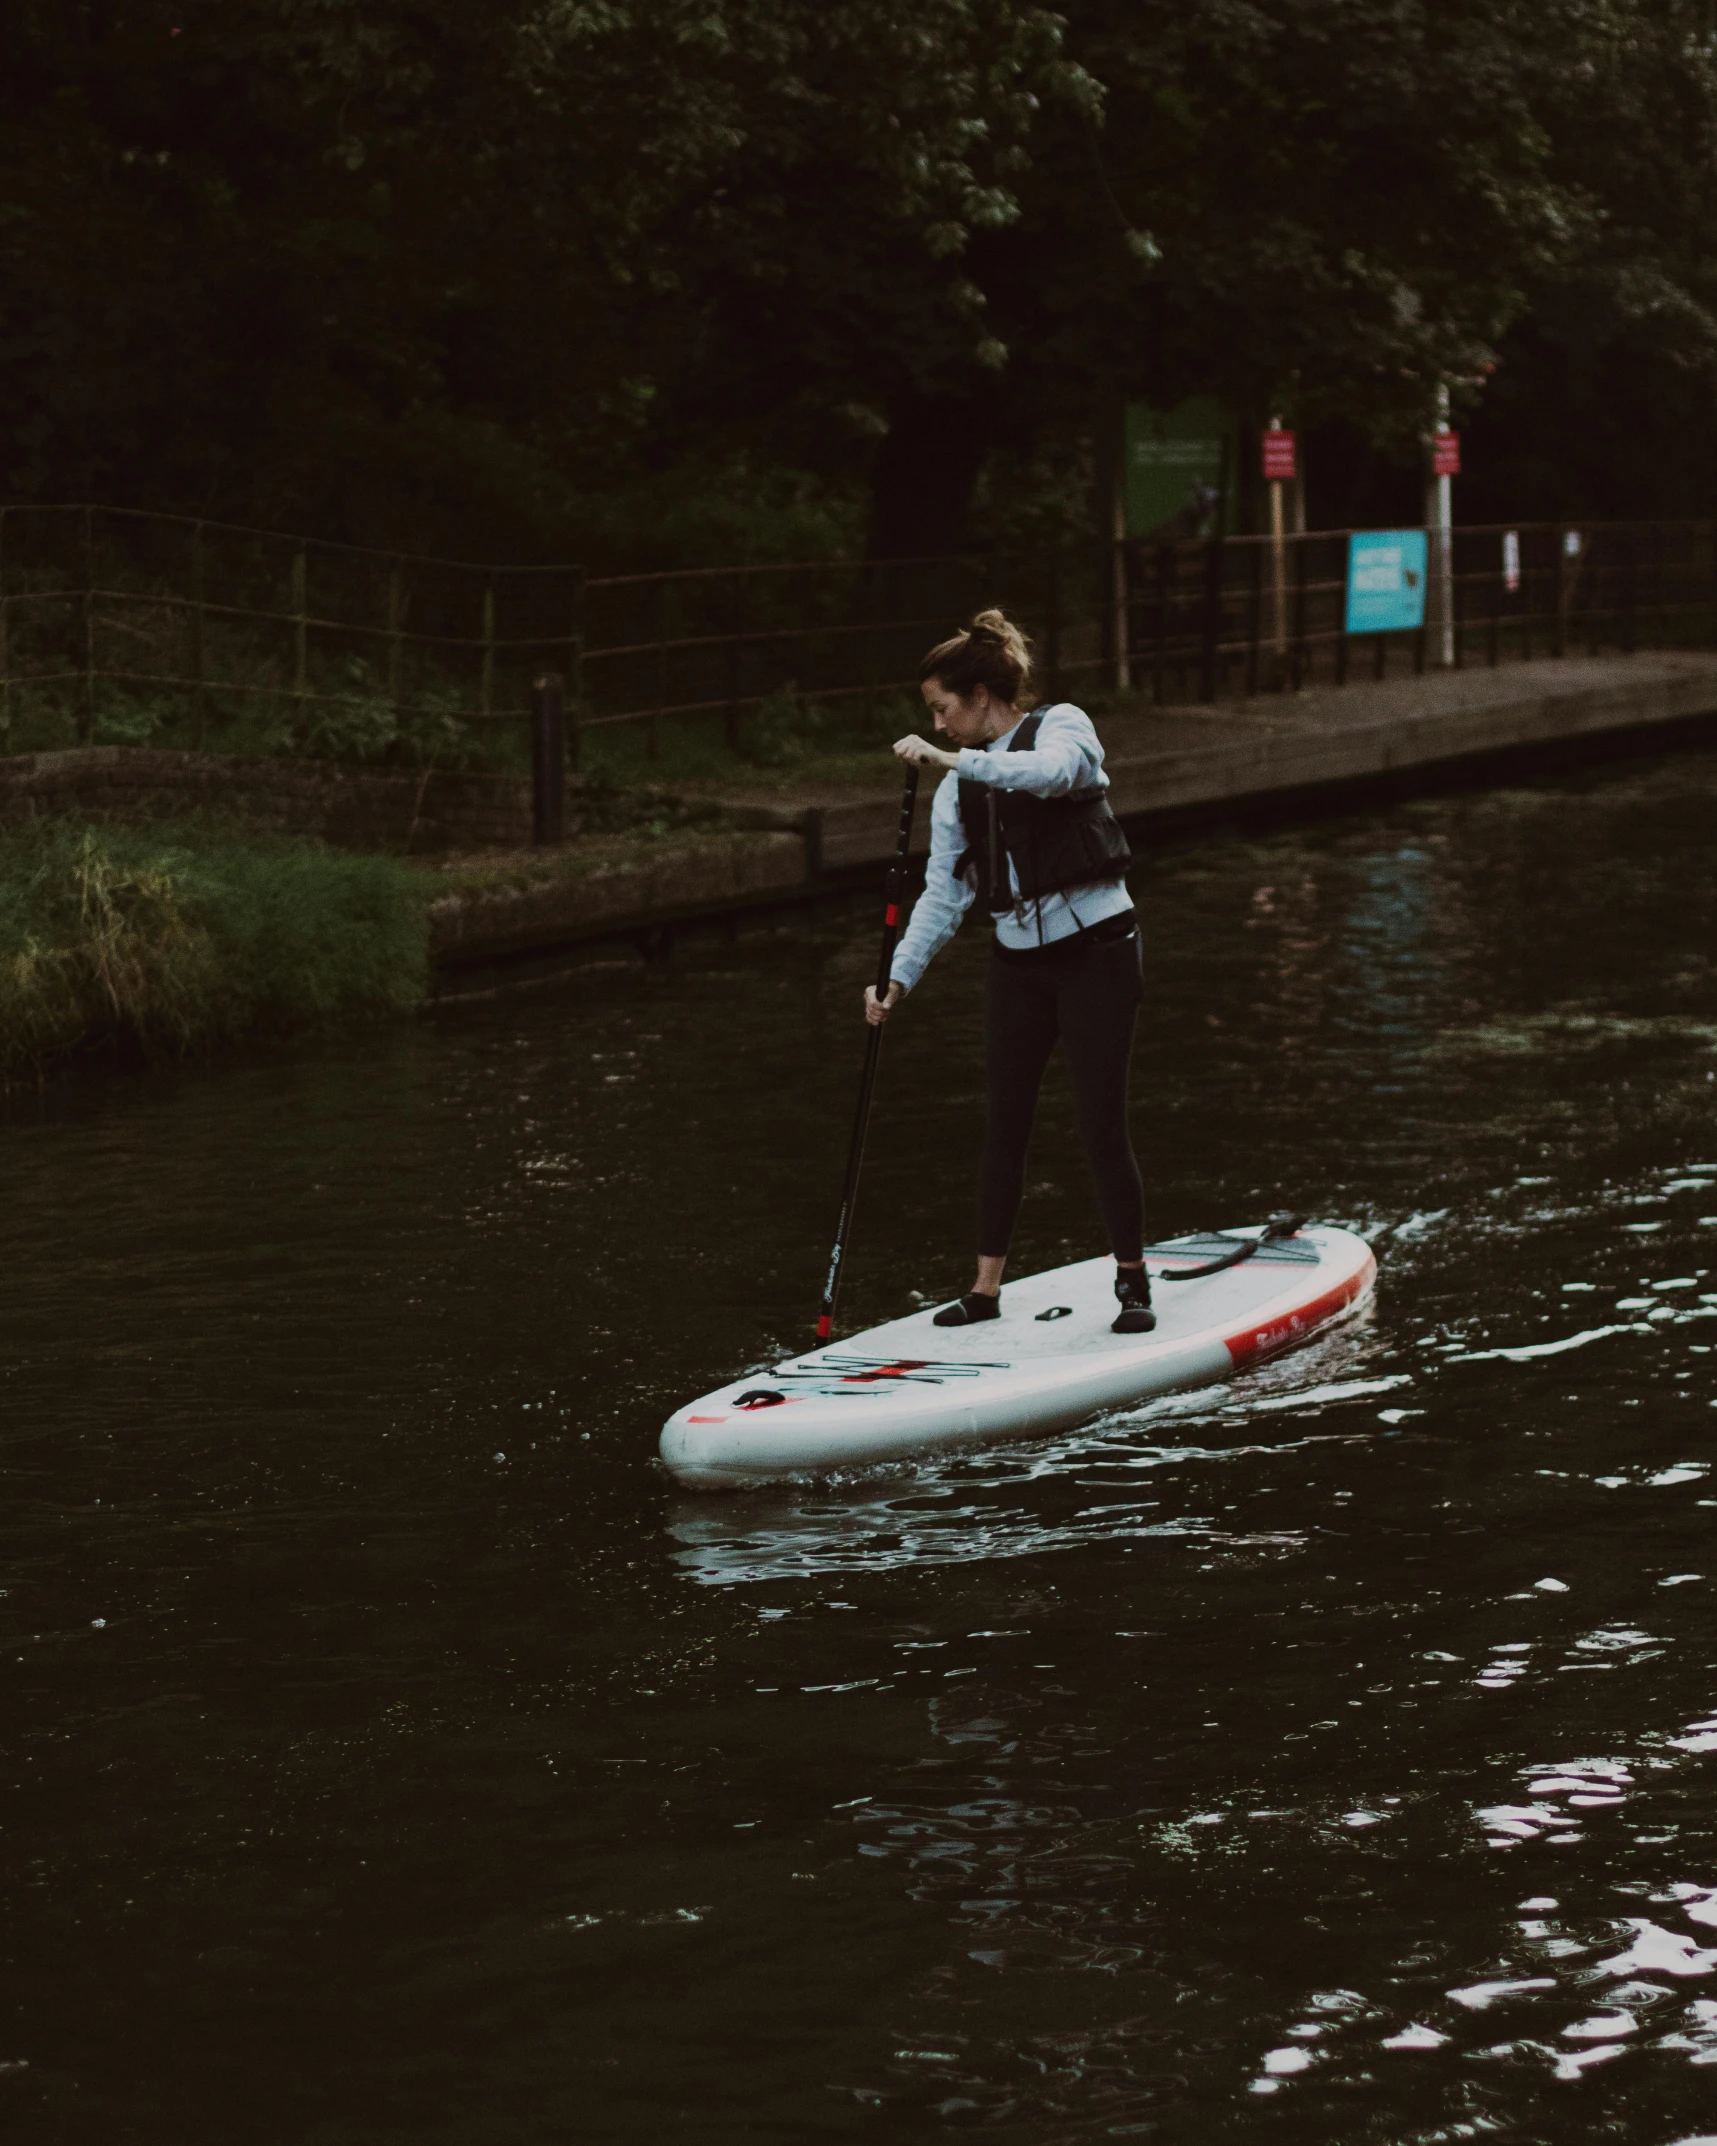 a woman riding a paddle board on top of a river, by Emma Andijewska, slight overcast lighting, charli bowater, canals, splash image